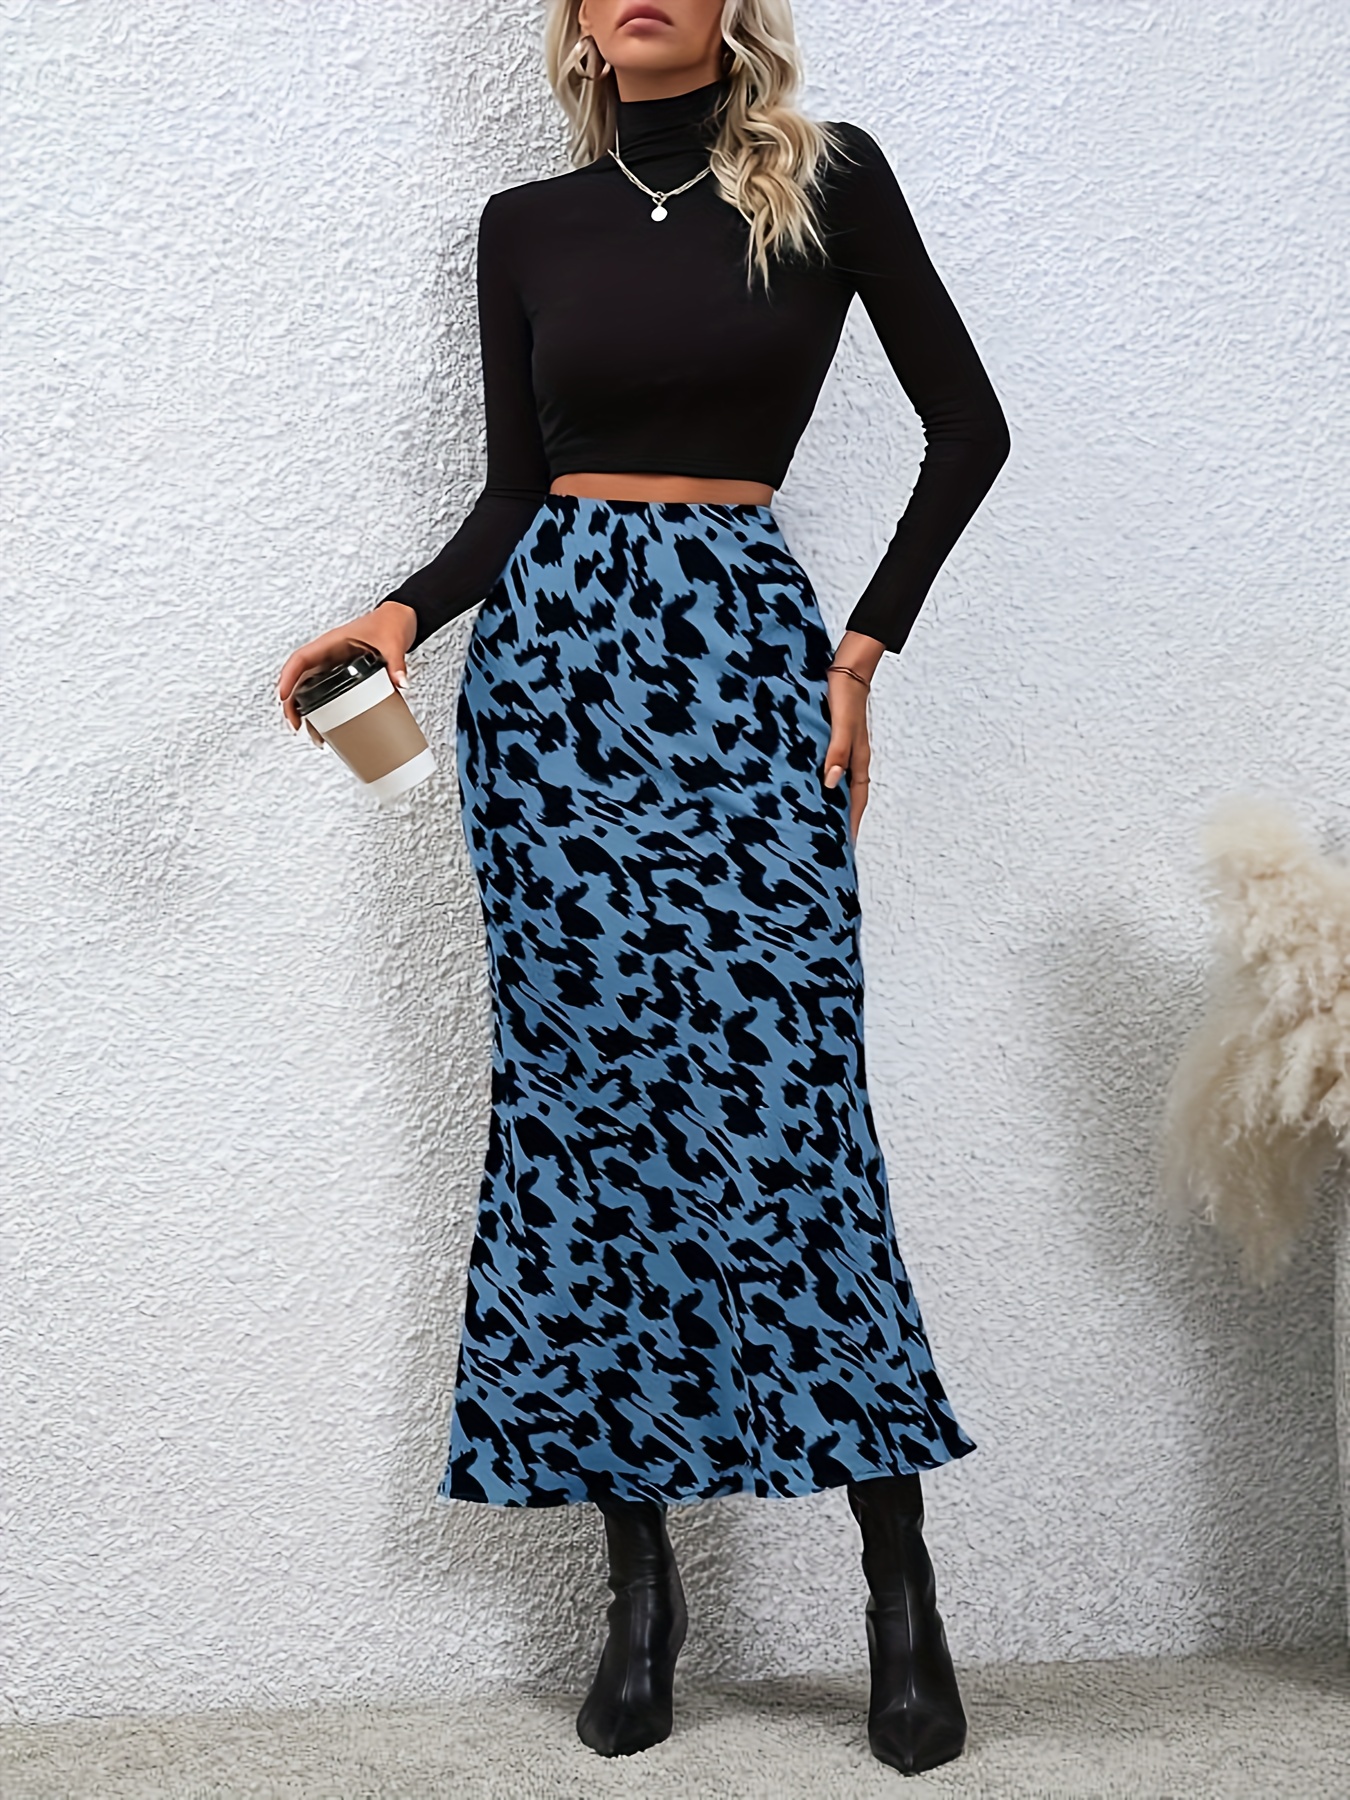 Leopard Print Leggings Are Our Answer To Summer's Leopard Print Midi Skirts